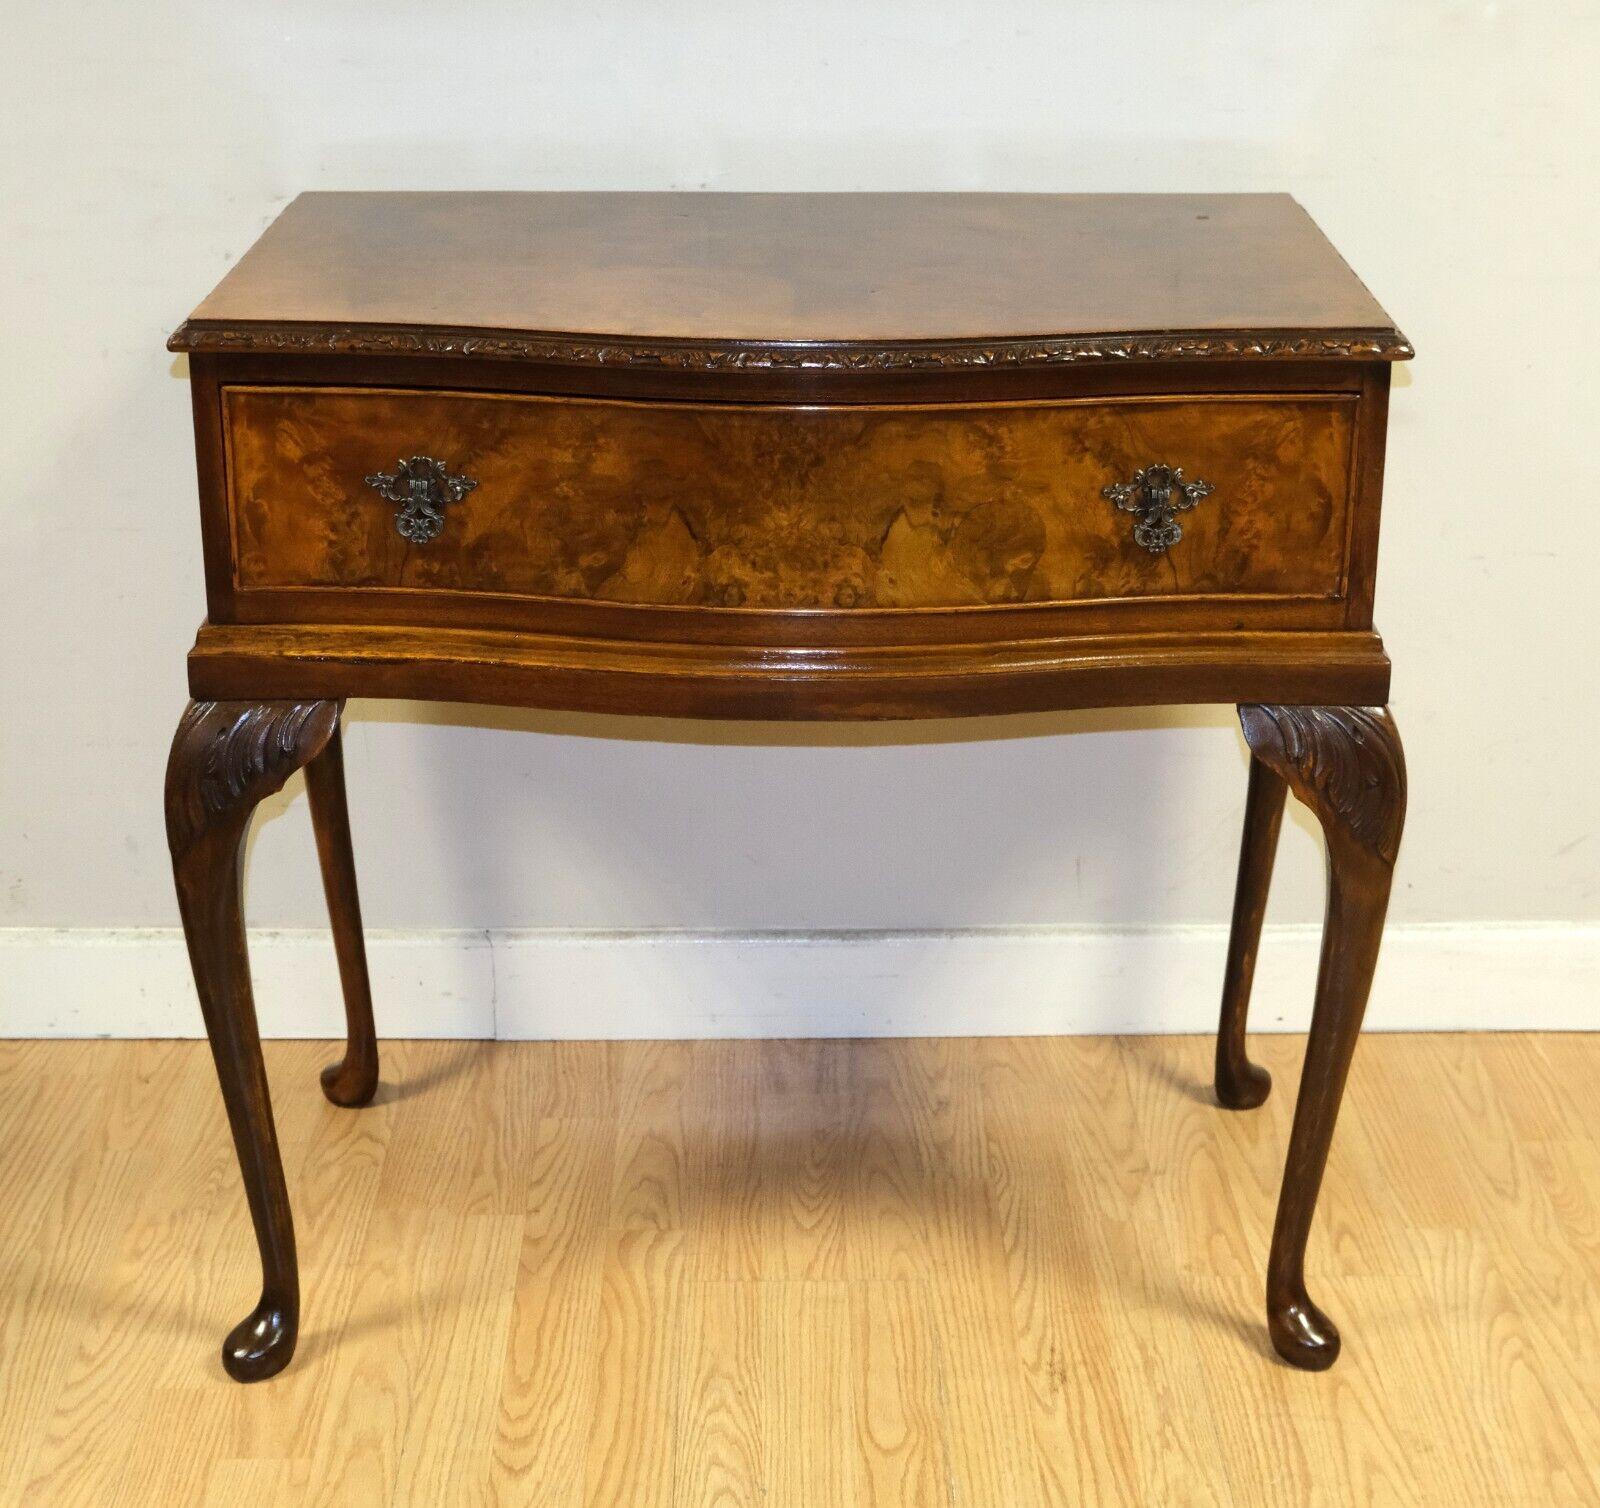 We are delighted to offer for sale this lovely Burr Walnut console/side table on Queen Ann style legs and single drawer. 

This gorgeous and well made piece is presented with a beautiful serpentine front and hand carved edge. The table is raised